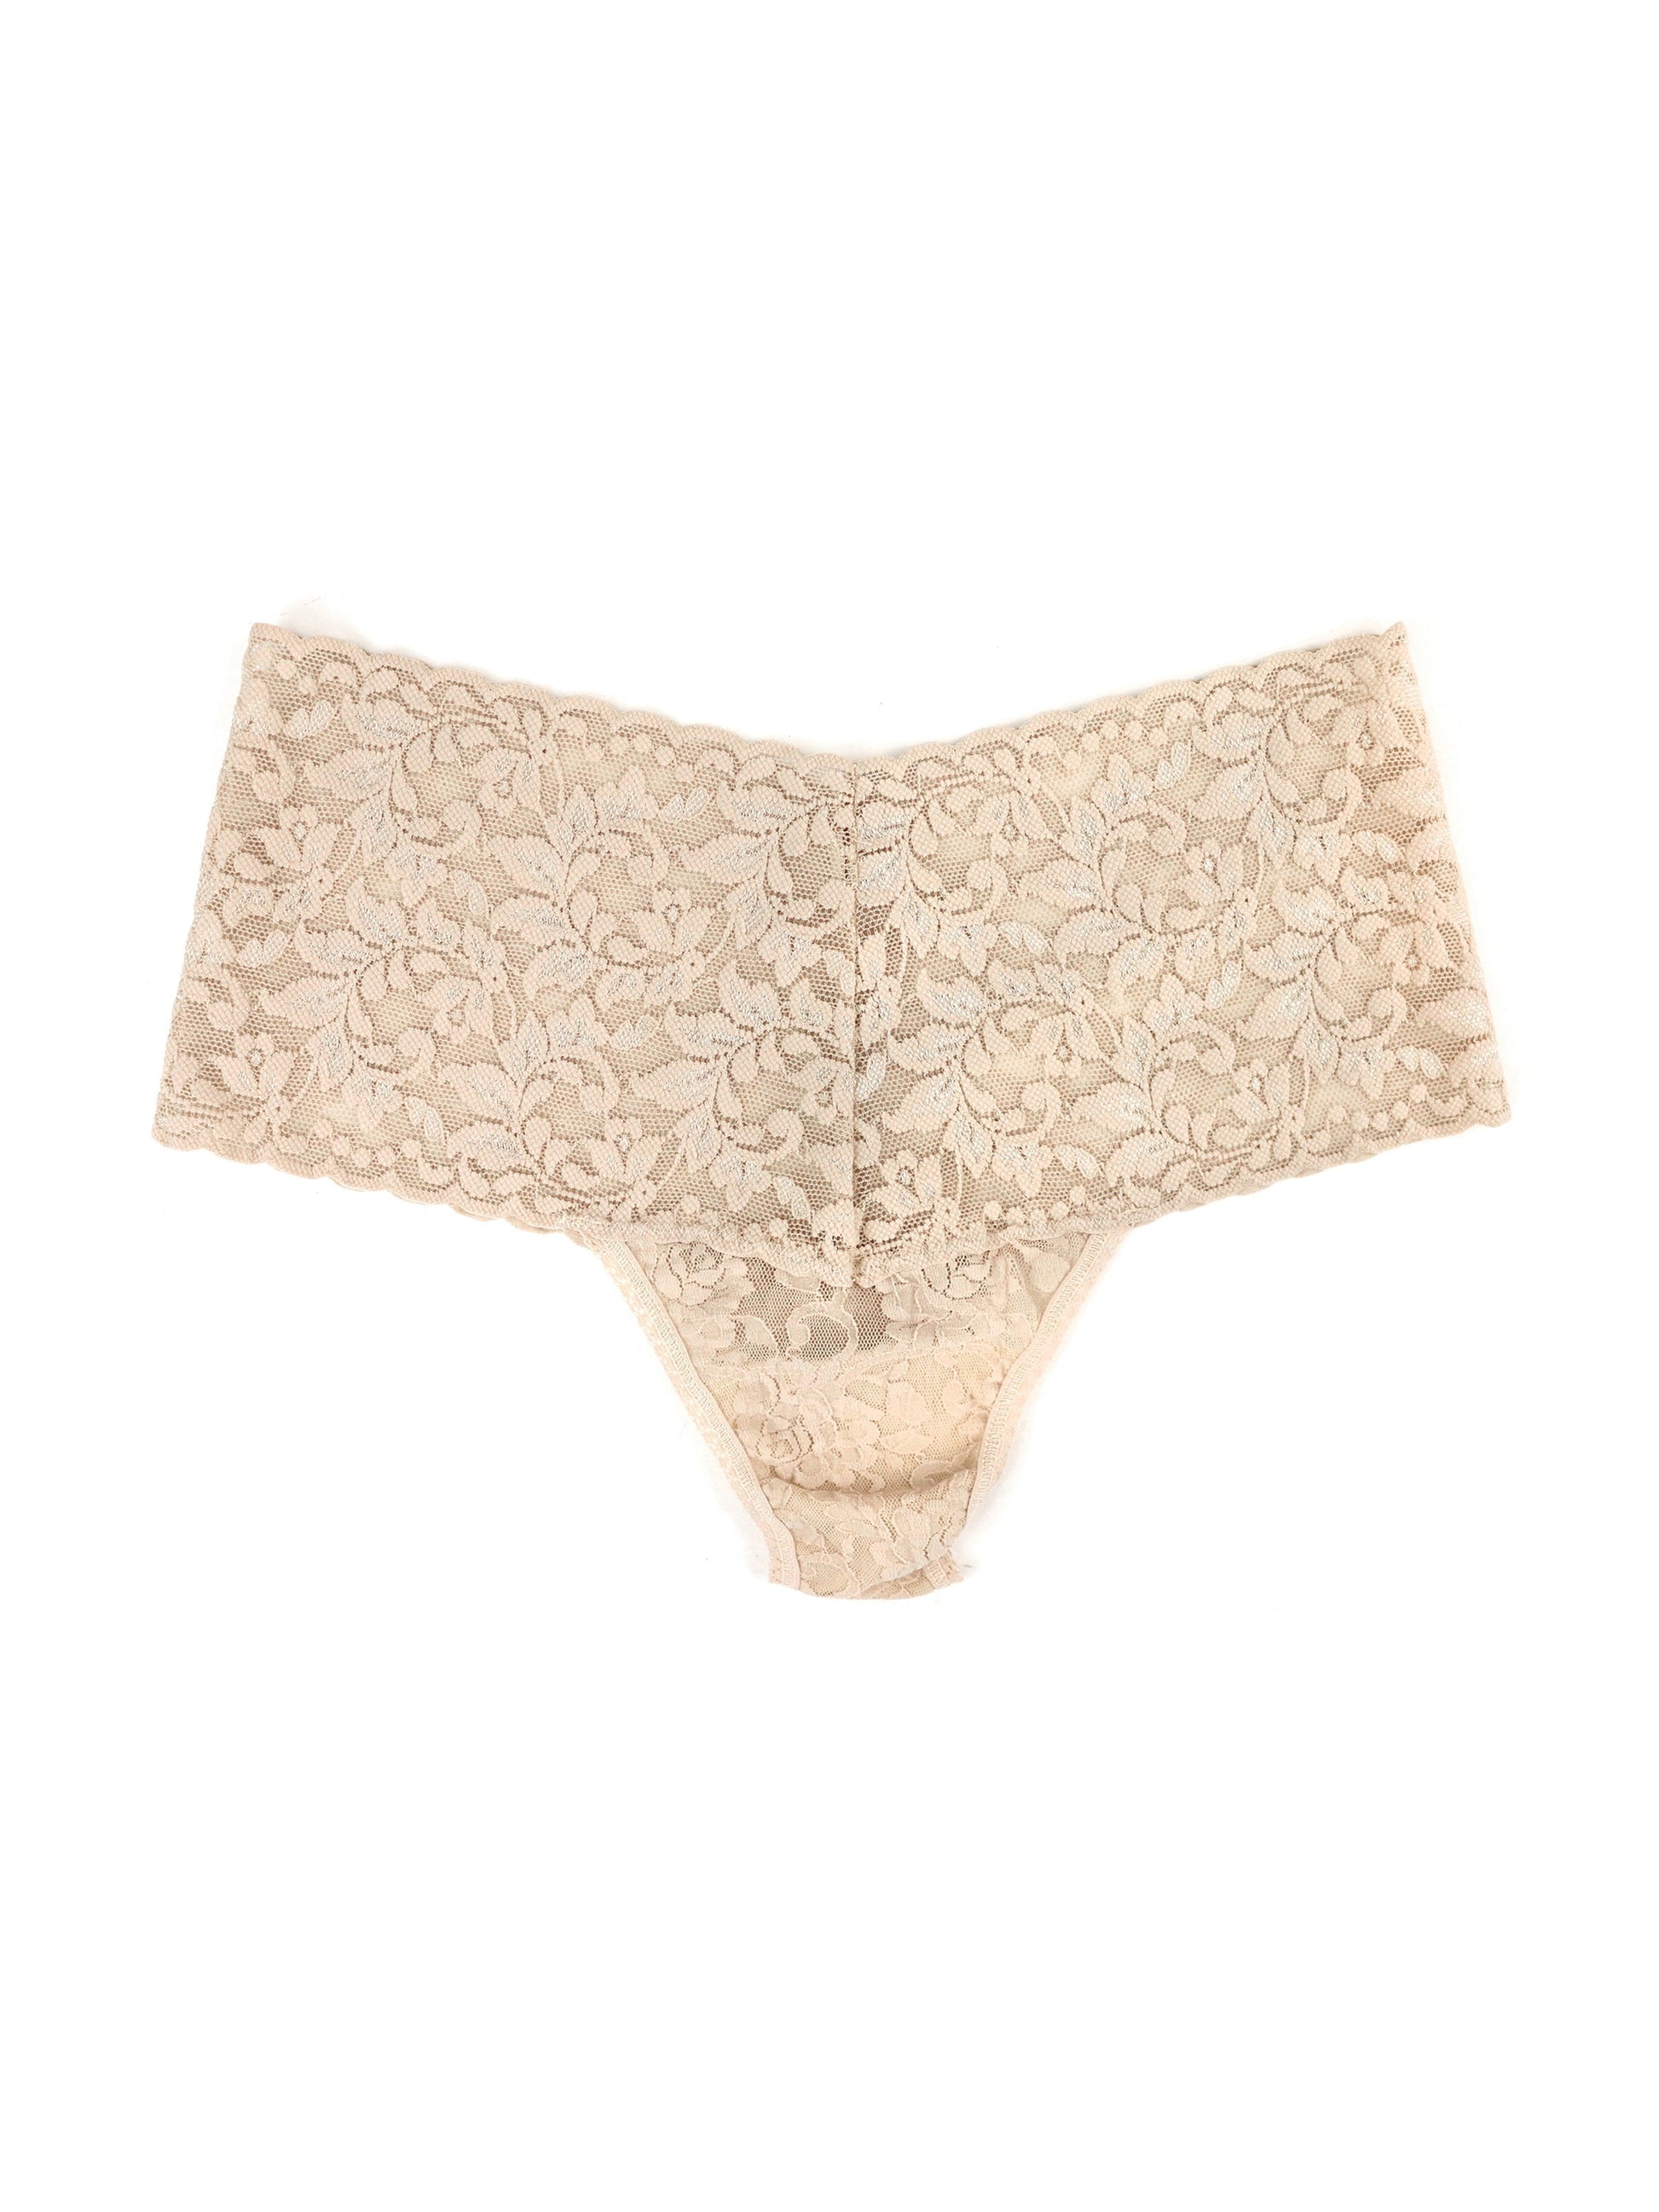 Hanky Panky Retro Thong in Chai in front view product image